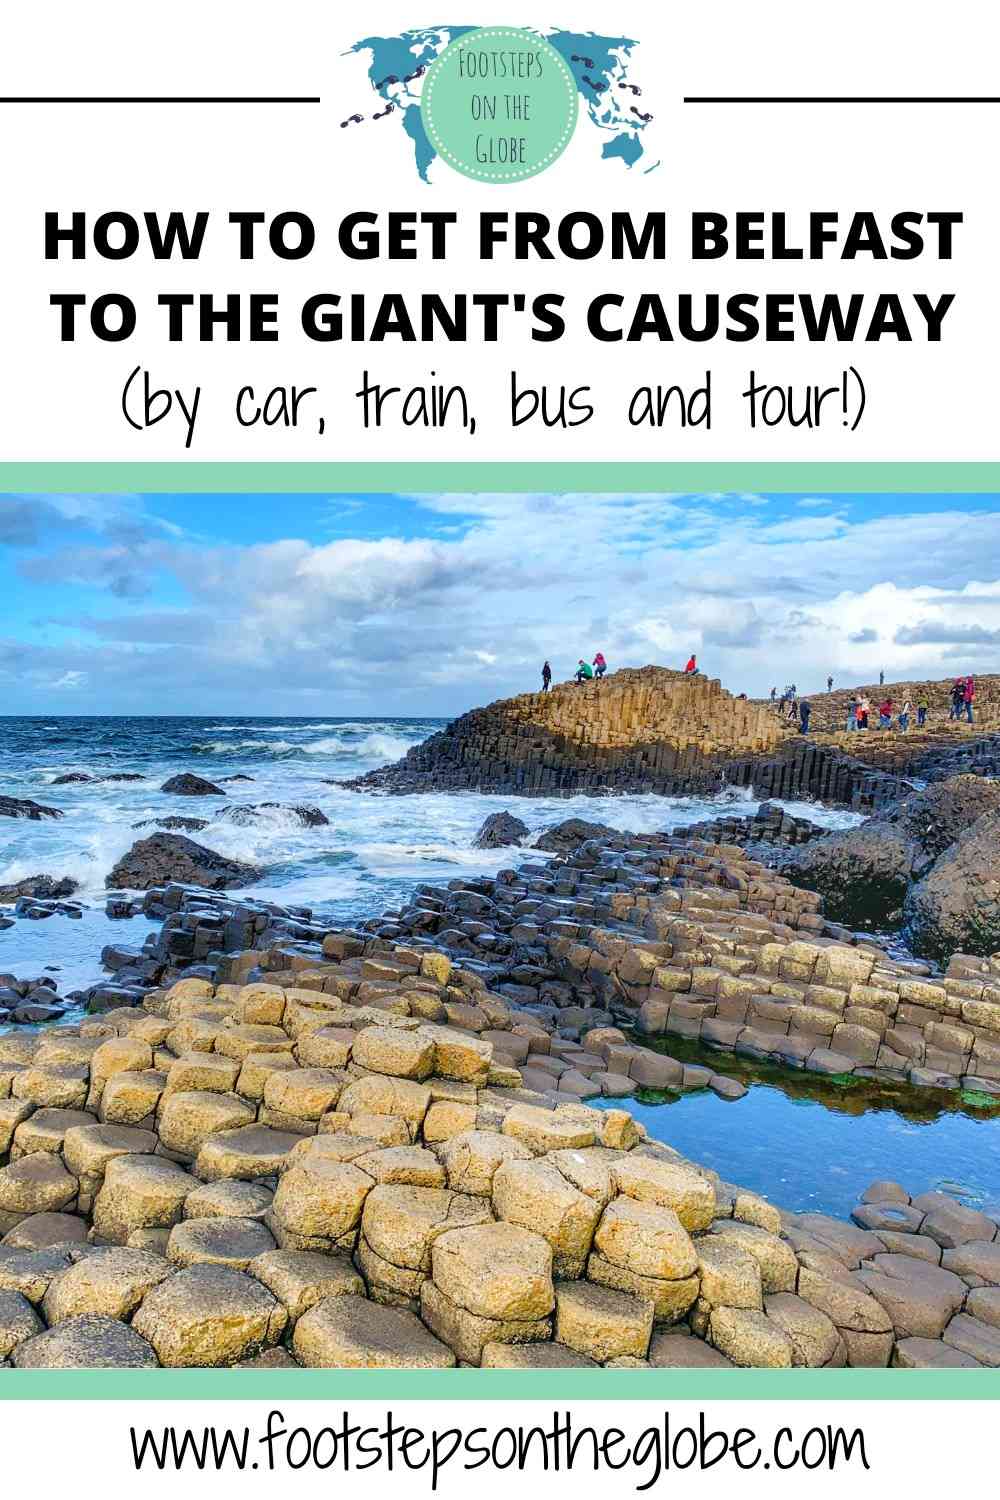 Image of the Giant's Causeway with jagged rocks and ocean waves with the text "How to get from Belfast to the Giant's Causeway (by car, train, bus, or tour!)" pinterest image